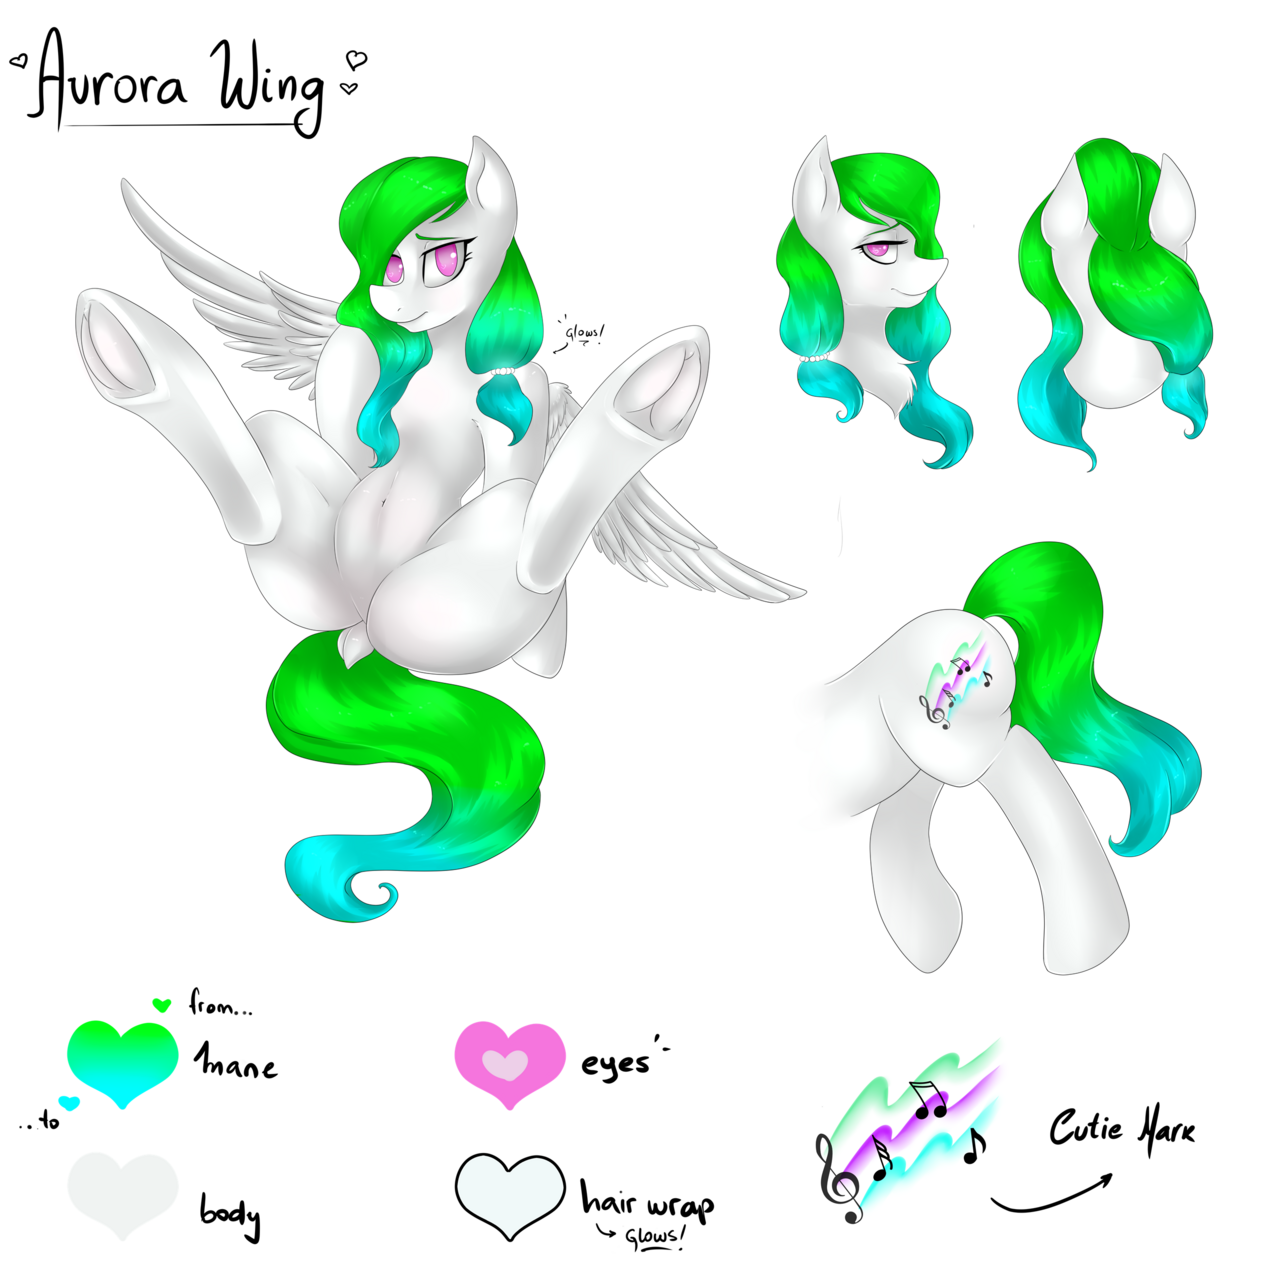 Aurora Wings reference sheet